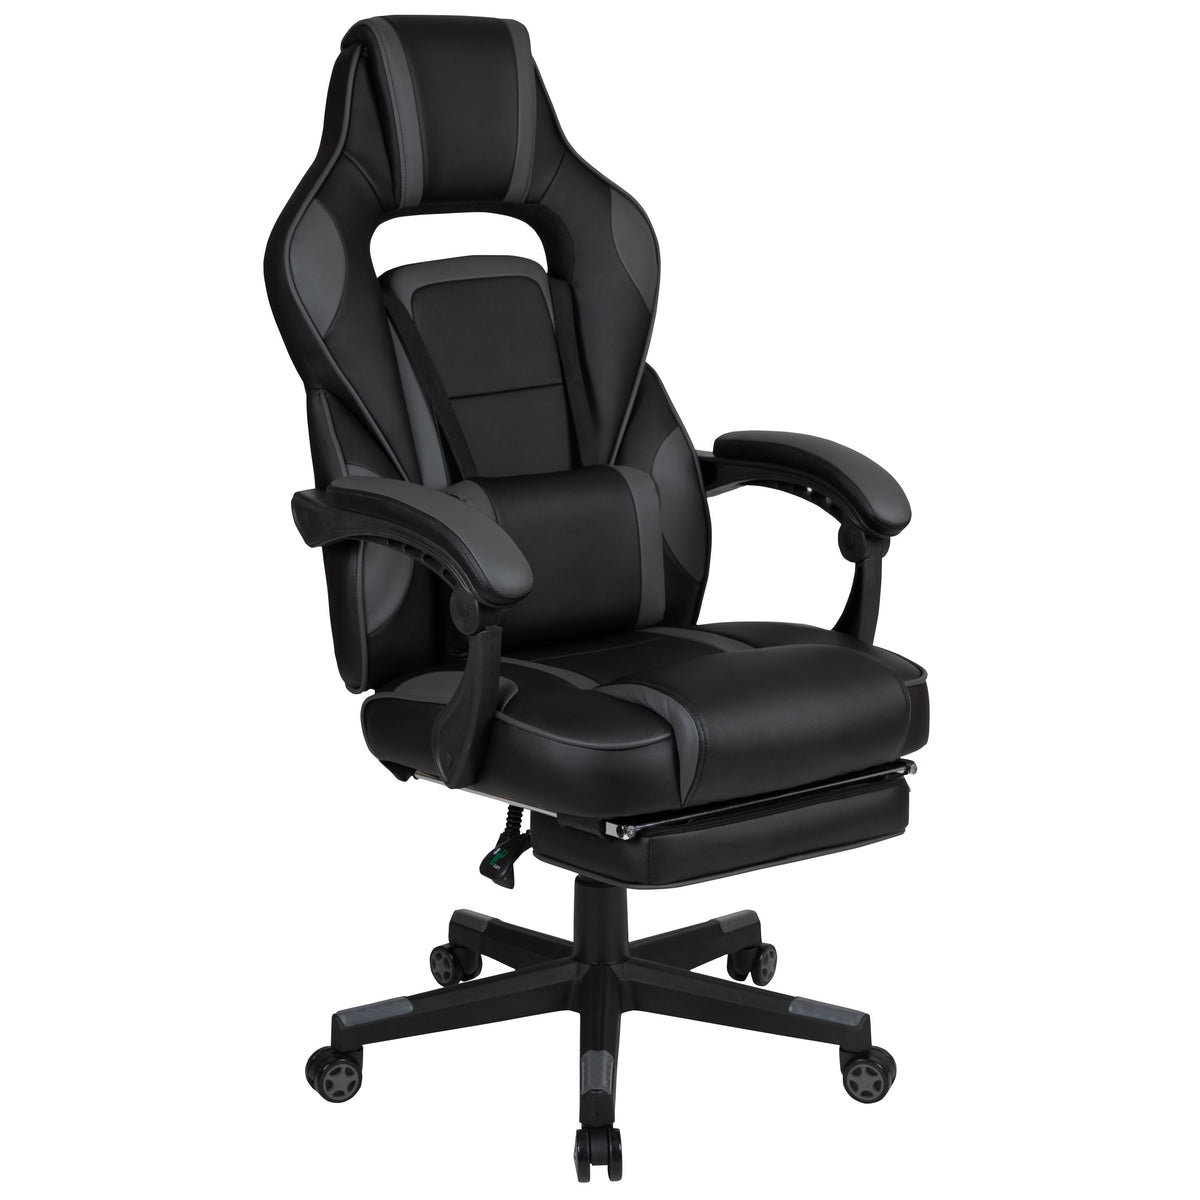 Black with Gray Trim |#| Fully Reclining Gaming Chair with Slideout Footrest, Lumbar Massage-Black/Gray